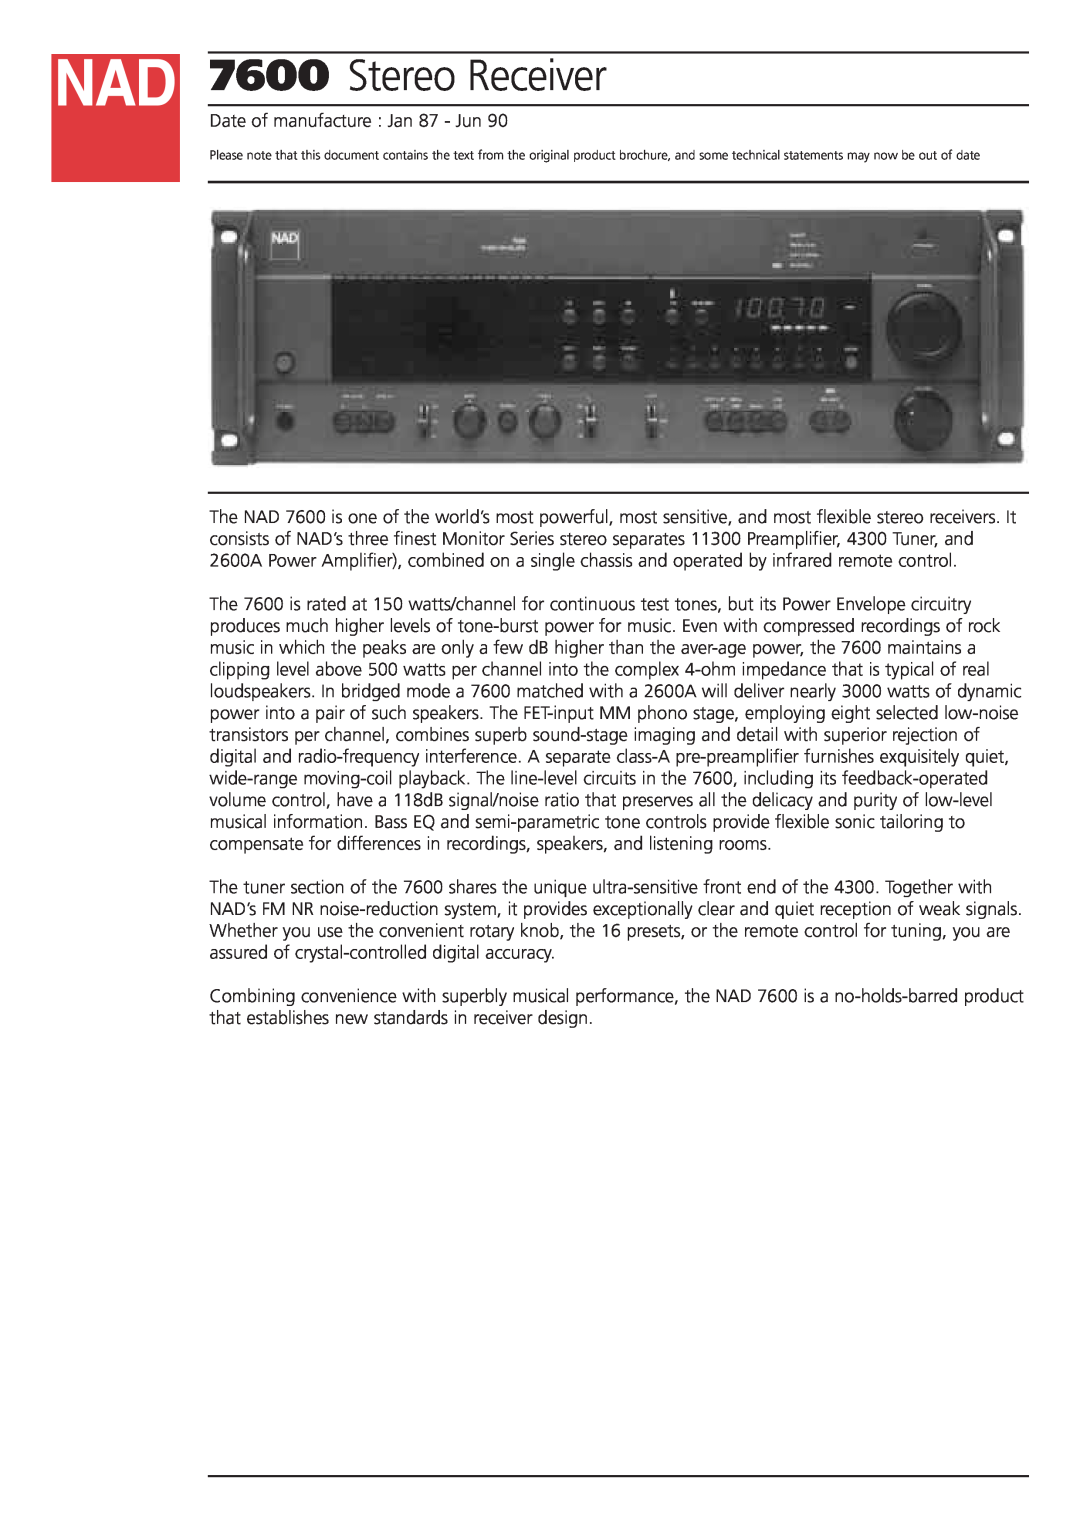 NAD 7600 brochure Stereo Receiver 